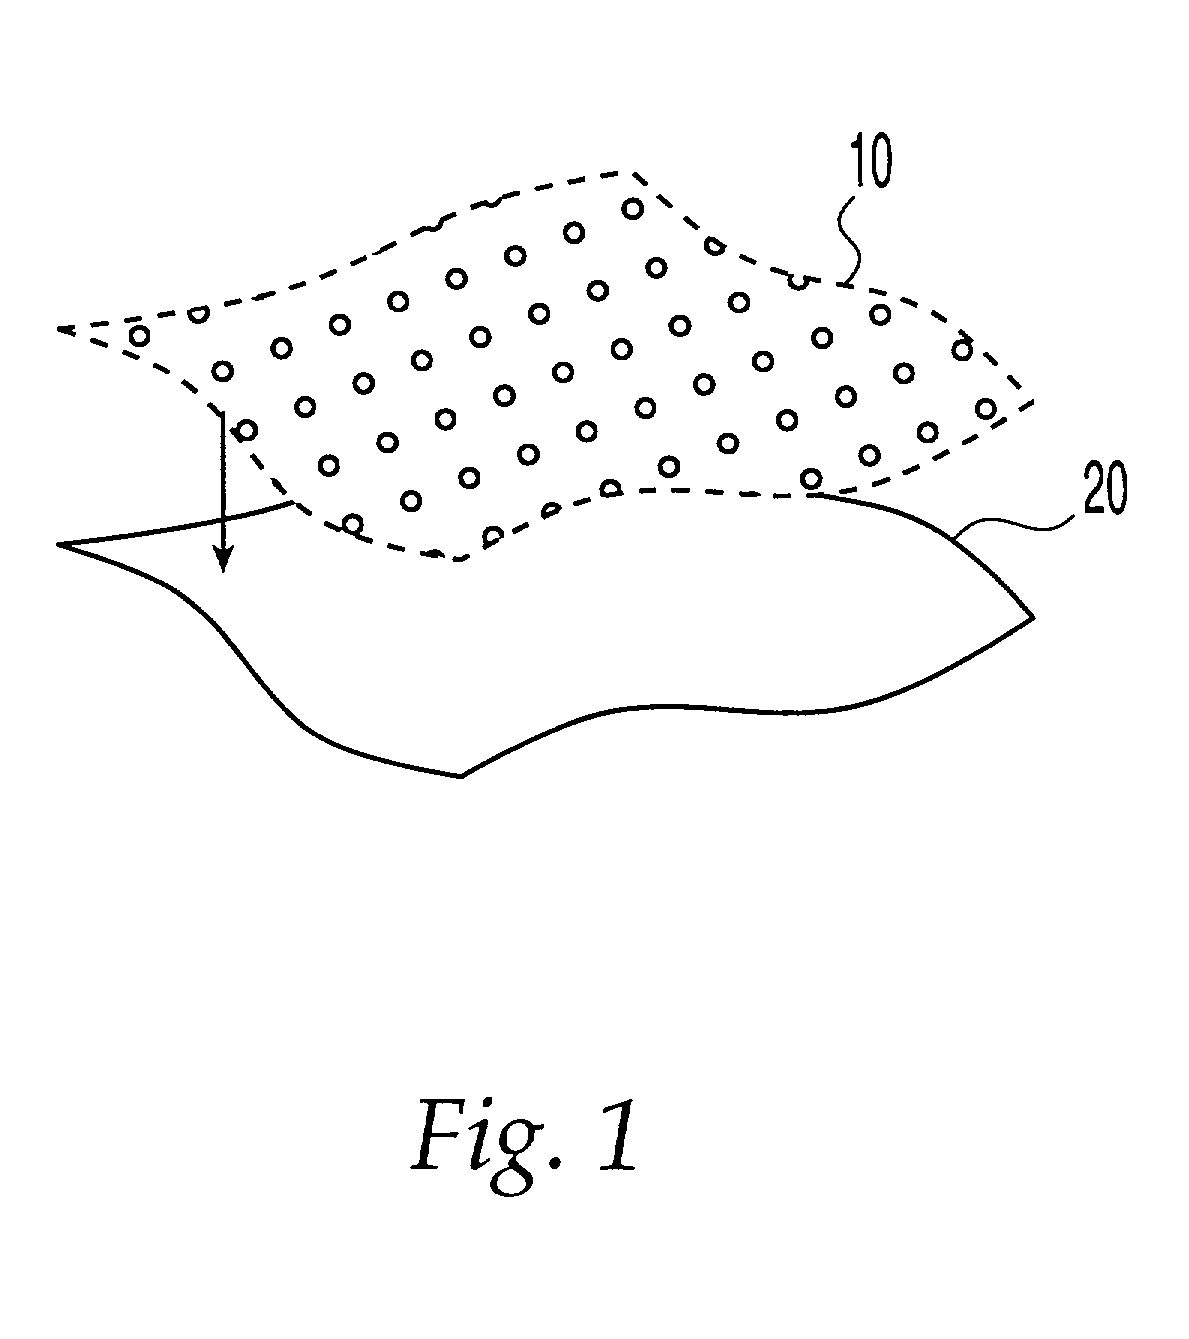 Coated filter bag material for oral administration of medicament in liquid and methods of making same